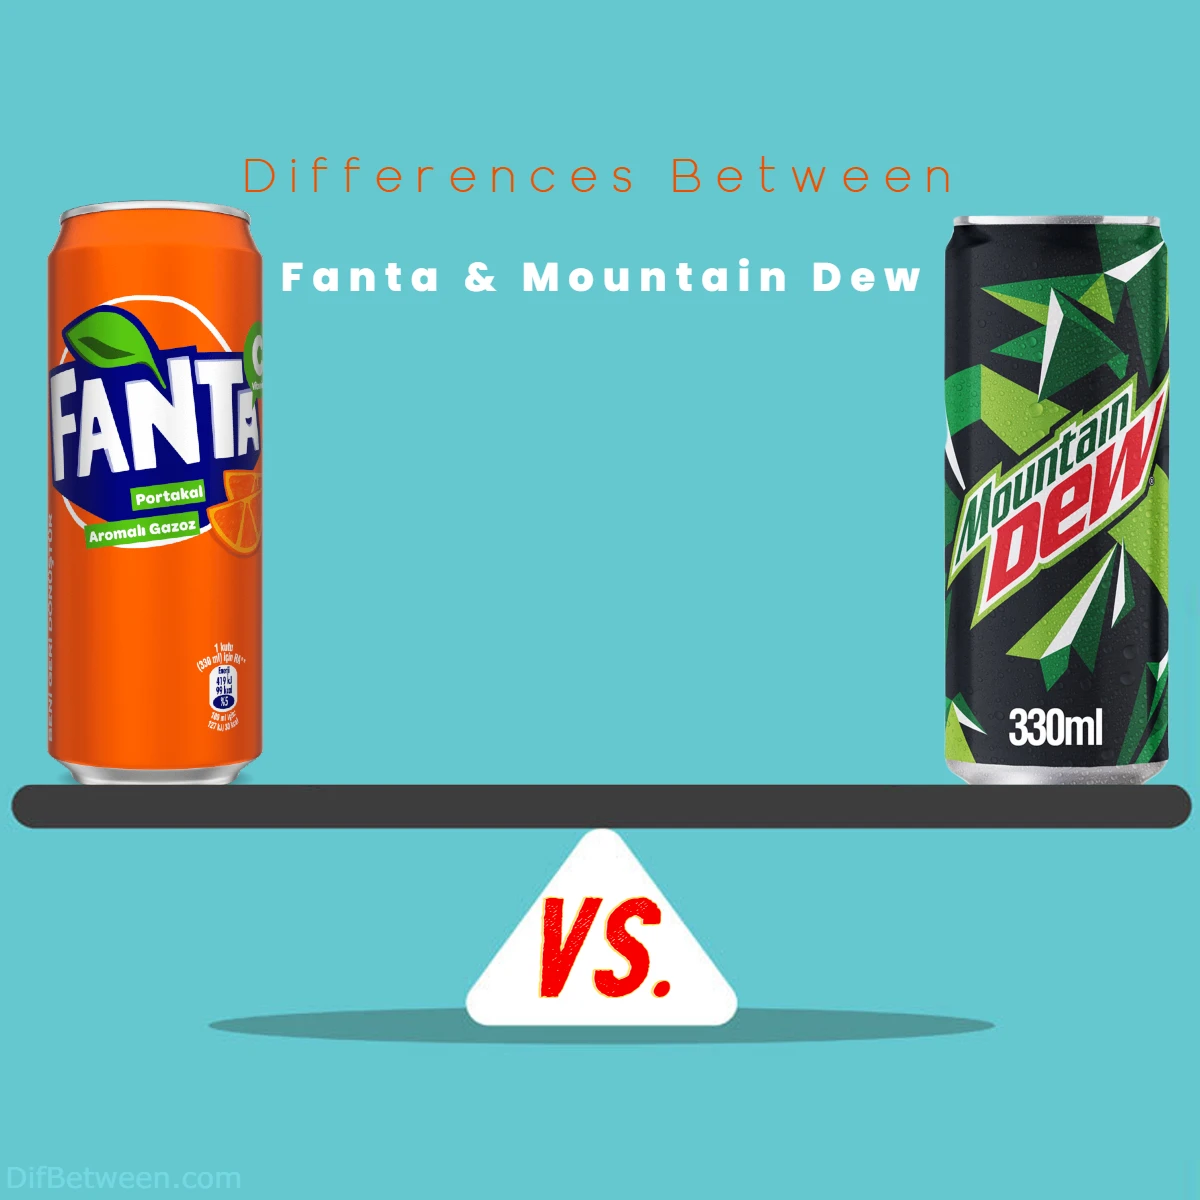 Differences Between Mountain Dew and Fanta